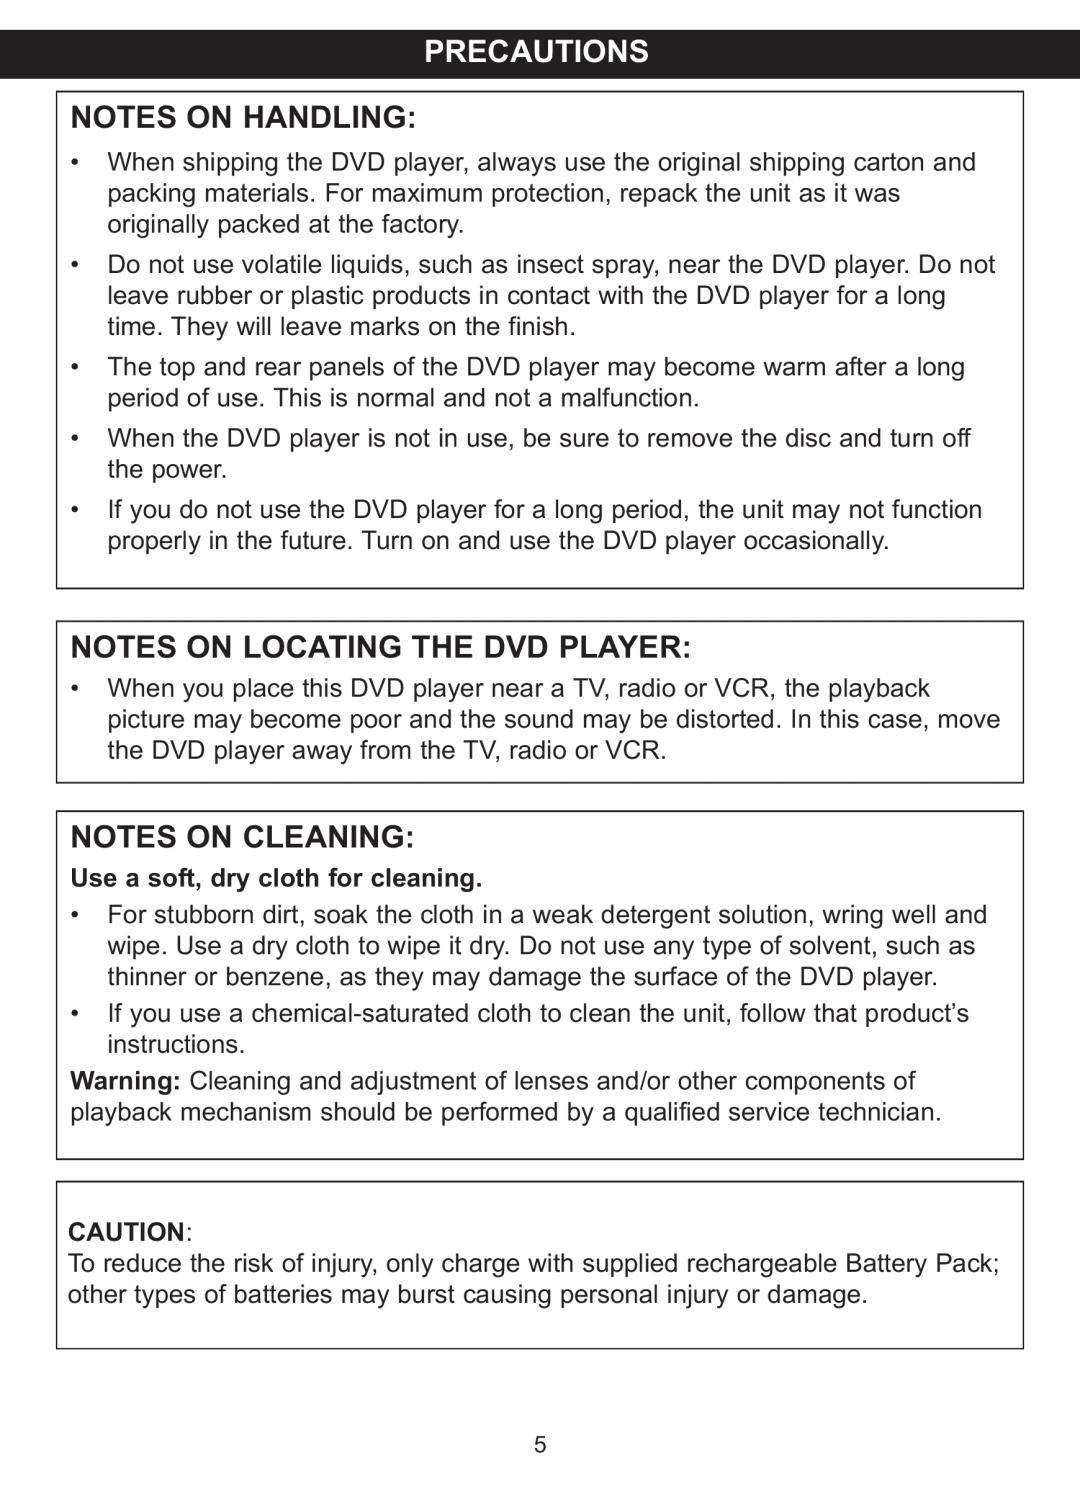 Memorex MVDP1088 manual Precautions, Notes On Handling, Notes On Locating The Dvd Player, Notes On Cleaning 